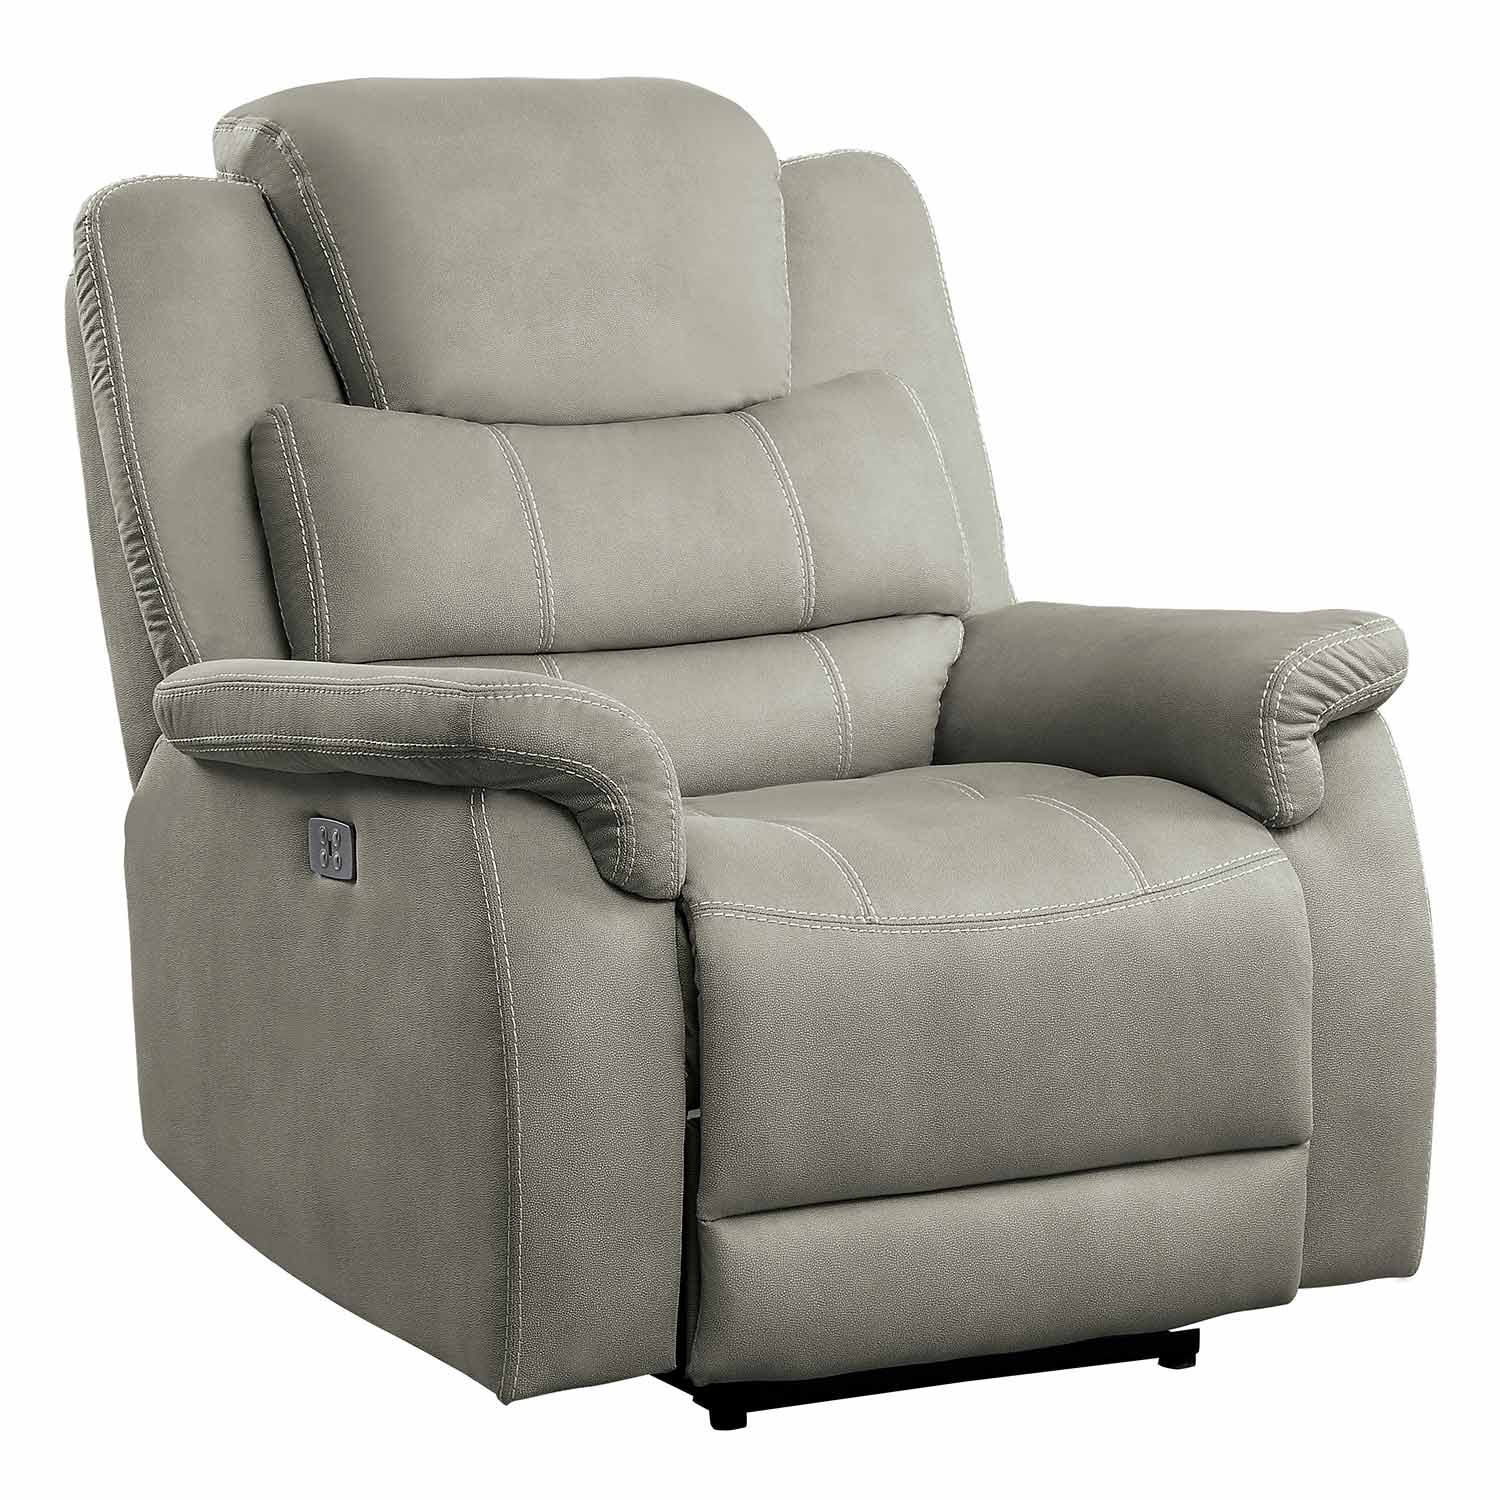 Homelegance Shola Power Reclining Chair with Power Headrest - Gray